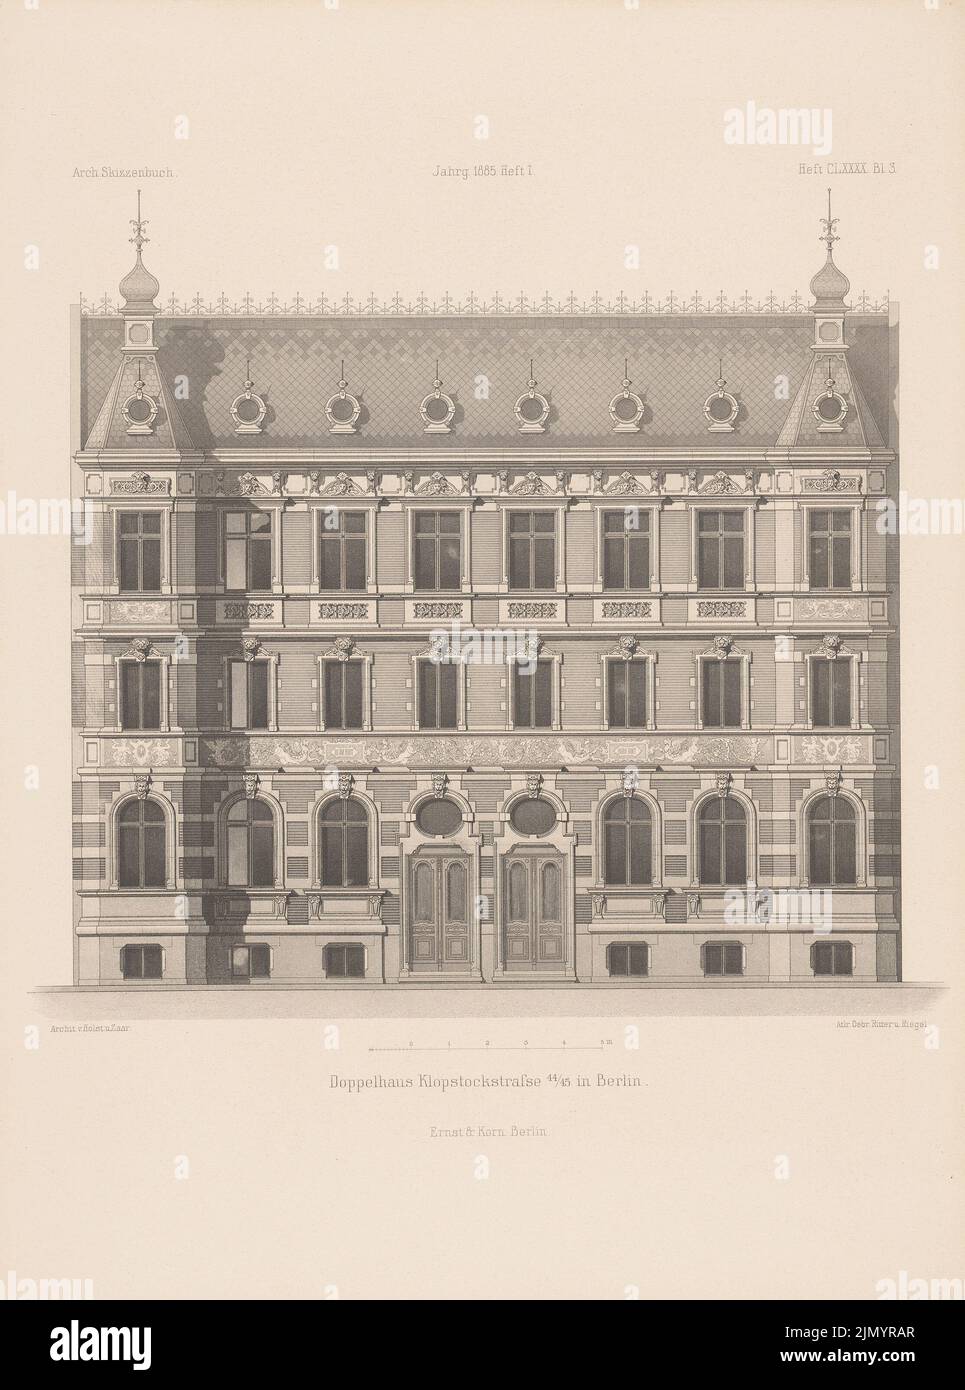 Holst & Zaar, double house Klopstockstraße 44/45, Berlin. (From: Architectural sketchbook, H. 190/1, 1885.) (1885-1885): View. Print on paper, 34.3 x 25.5 cm (including scan edges) Stock Photo